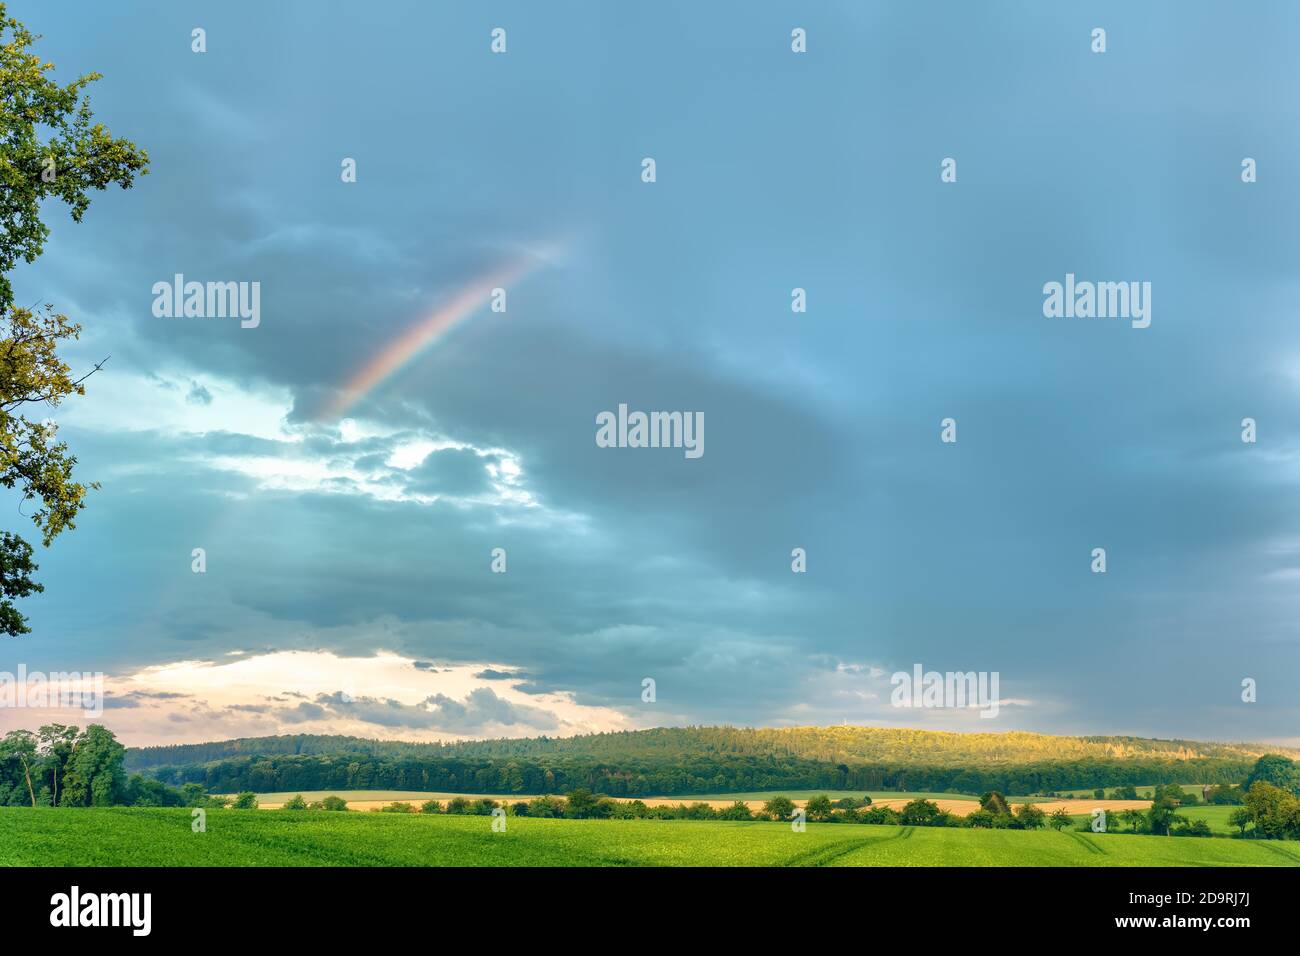 A rainbow over the green and sunny fields Stock Photo